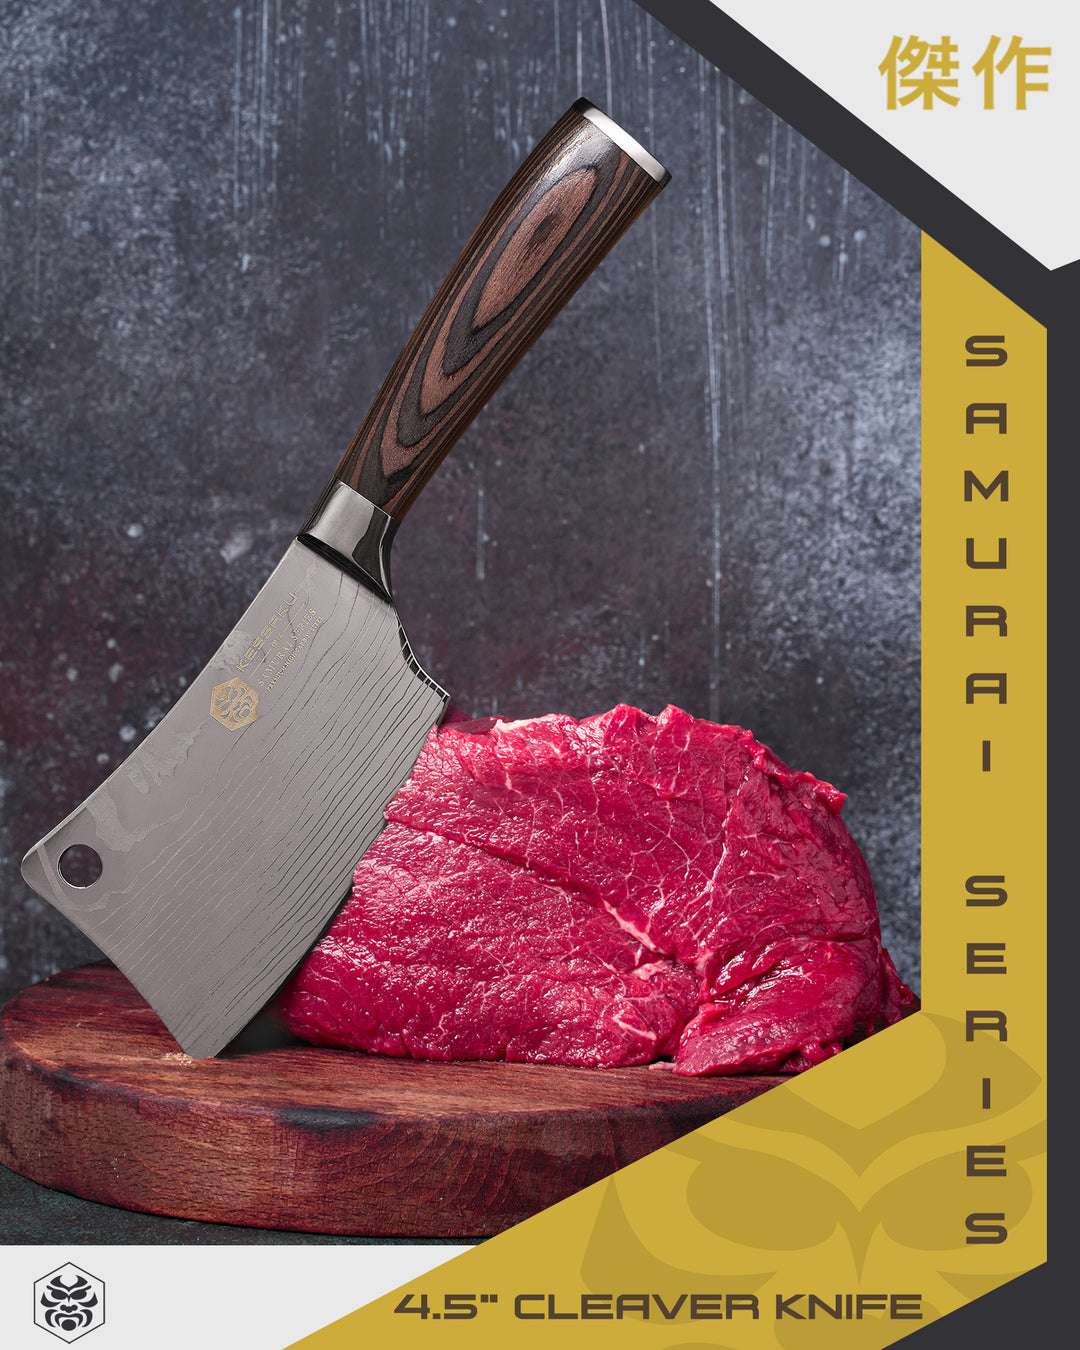 The Samurai Mini Cleaver leaning on a large roast beef while partially embedded in a cutting board